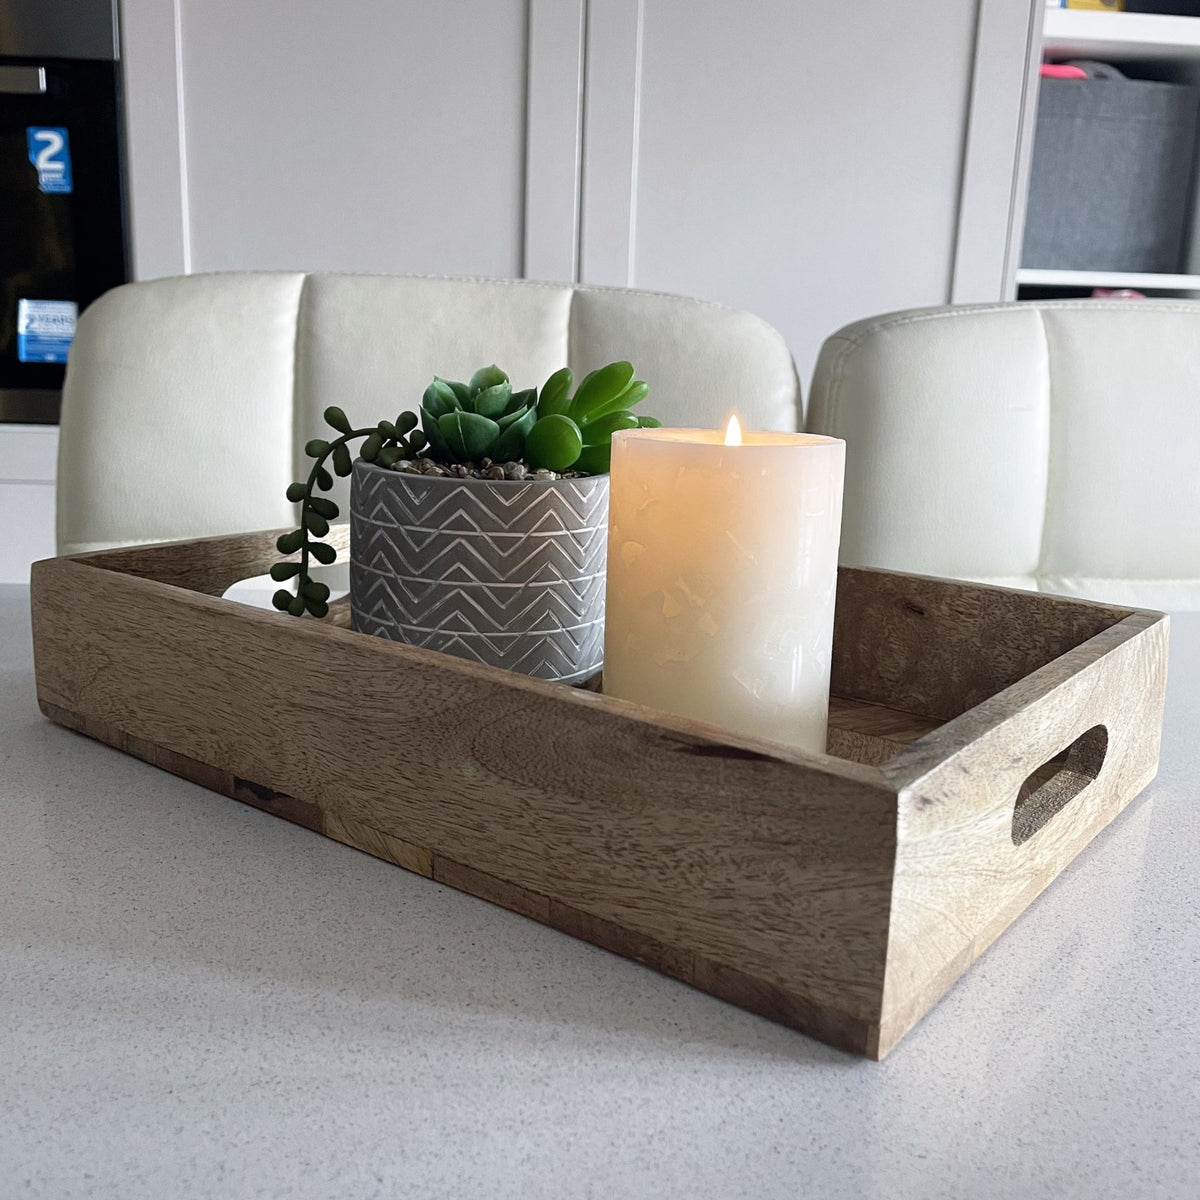 Rectangular Herringbone Wooden Serving Tray small on a kitchen bench with a planter and lit candle